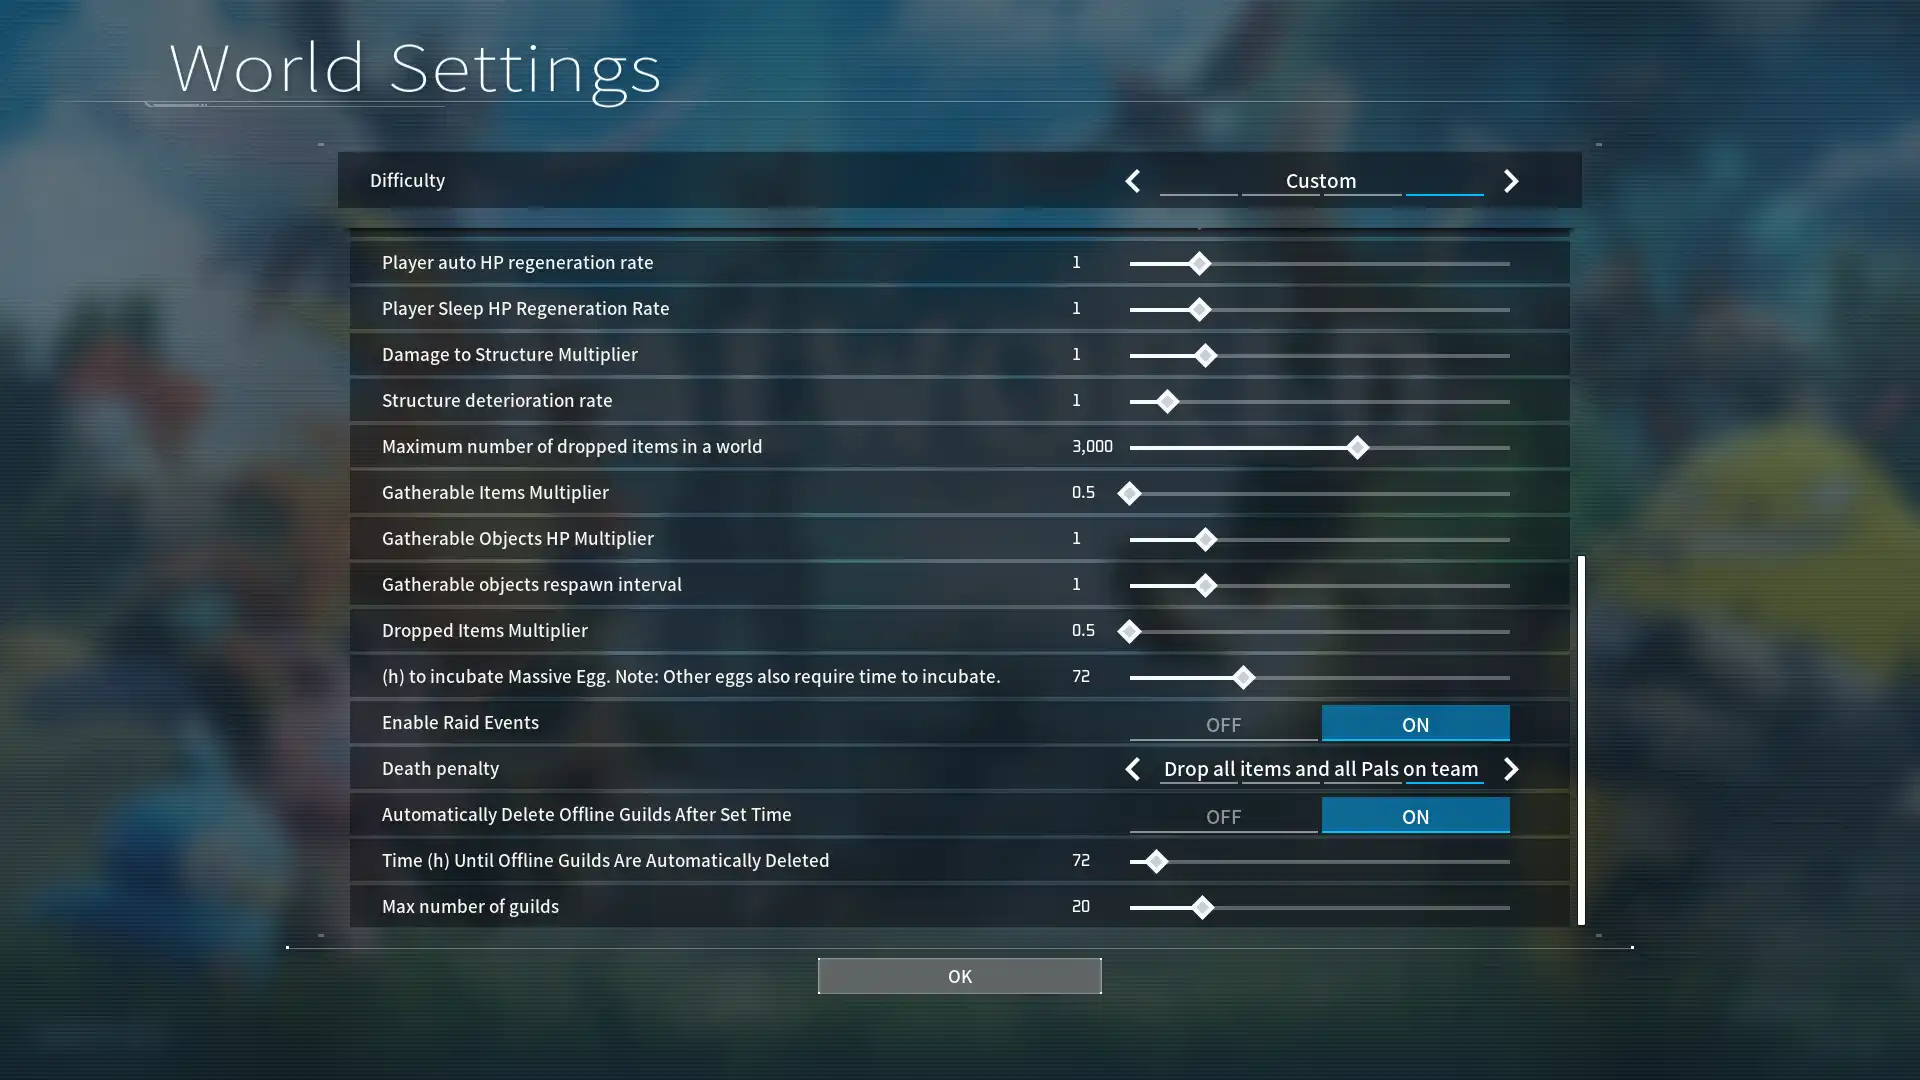 palworld custom settings difficulty page 2